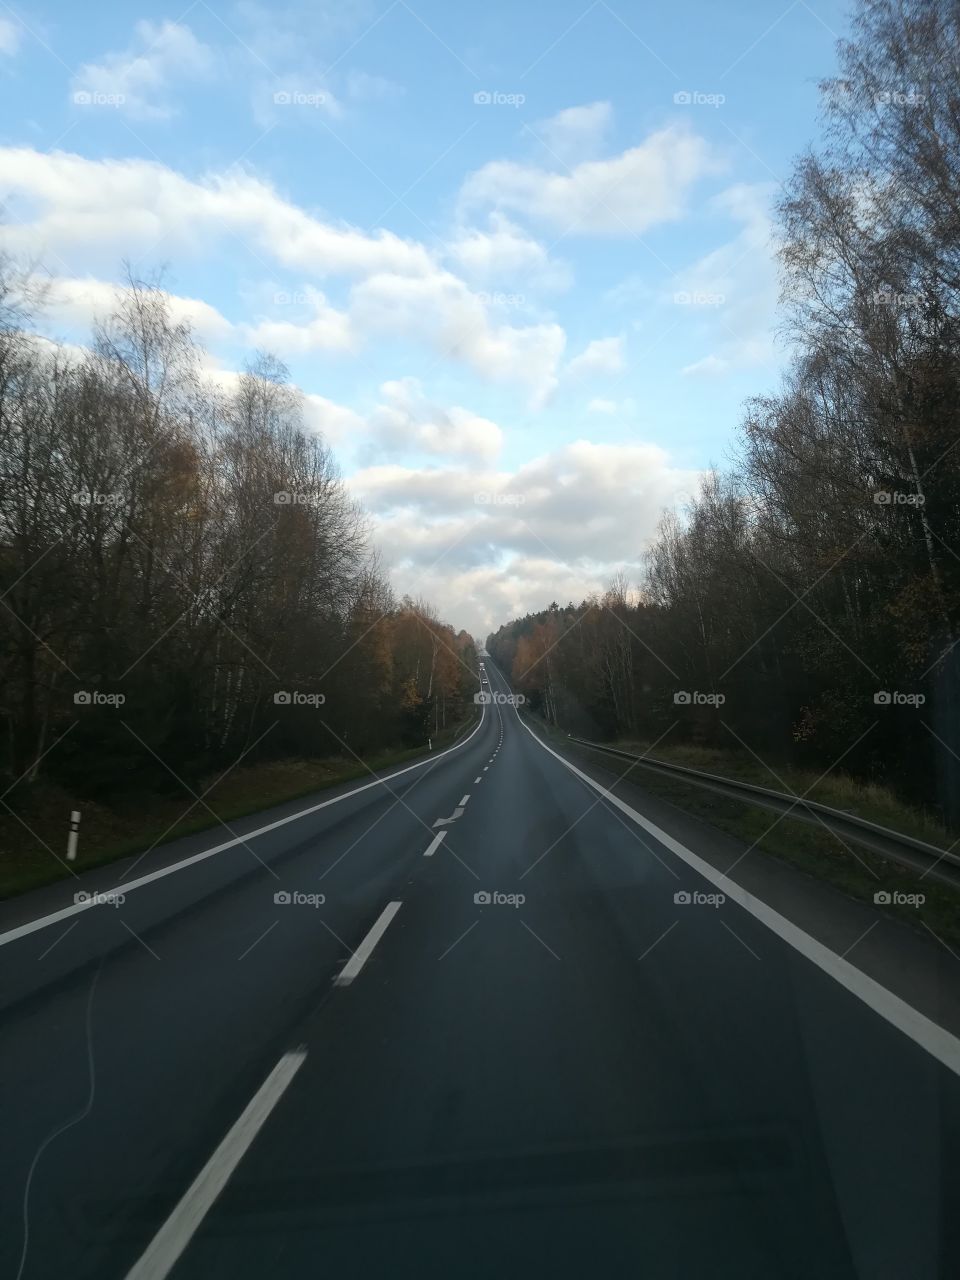 On the road again, travel to Prague